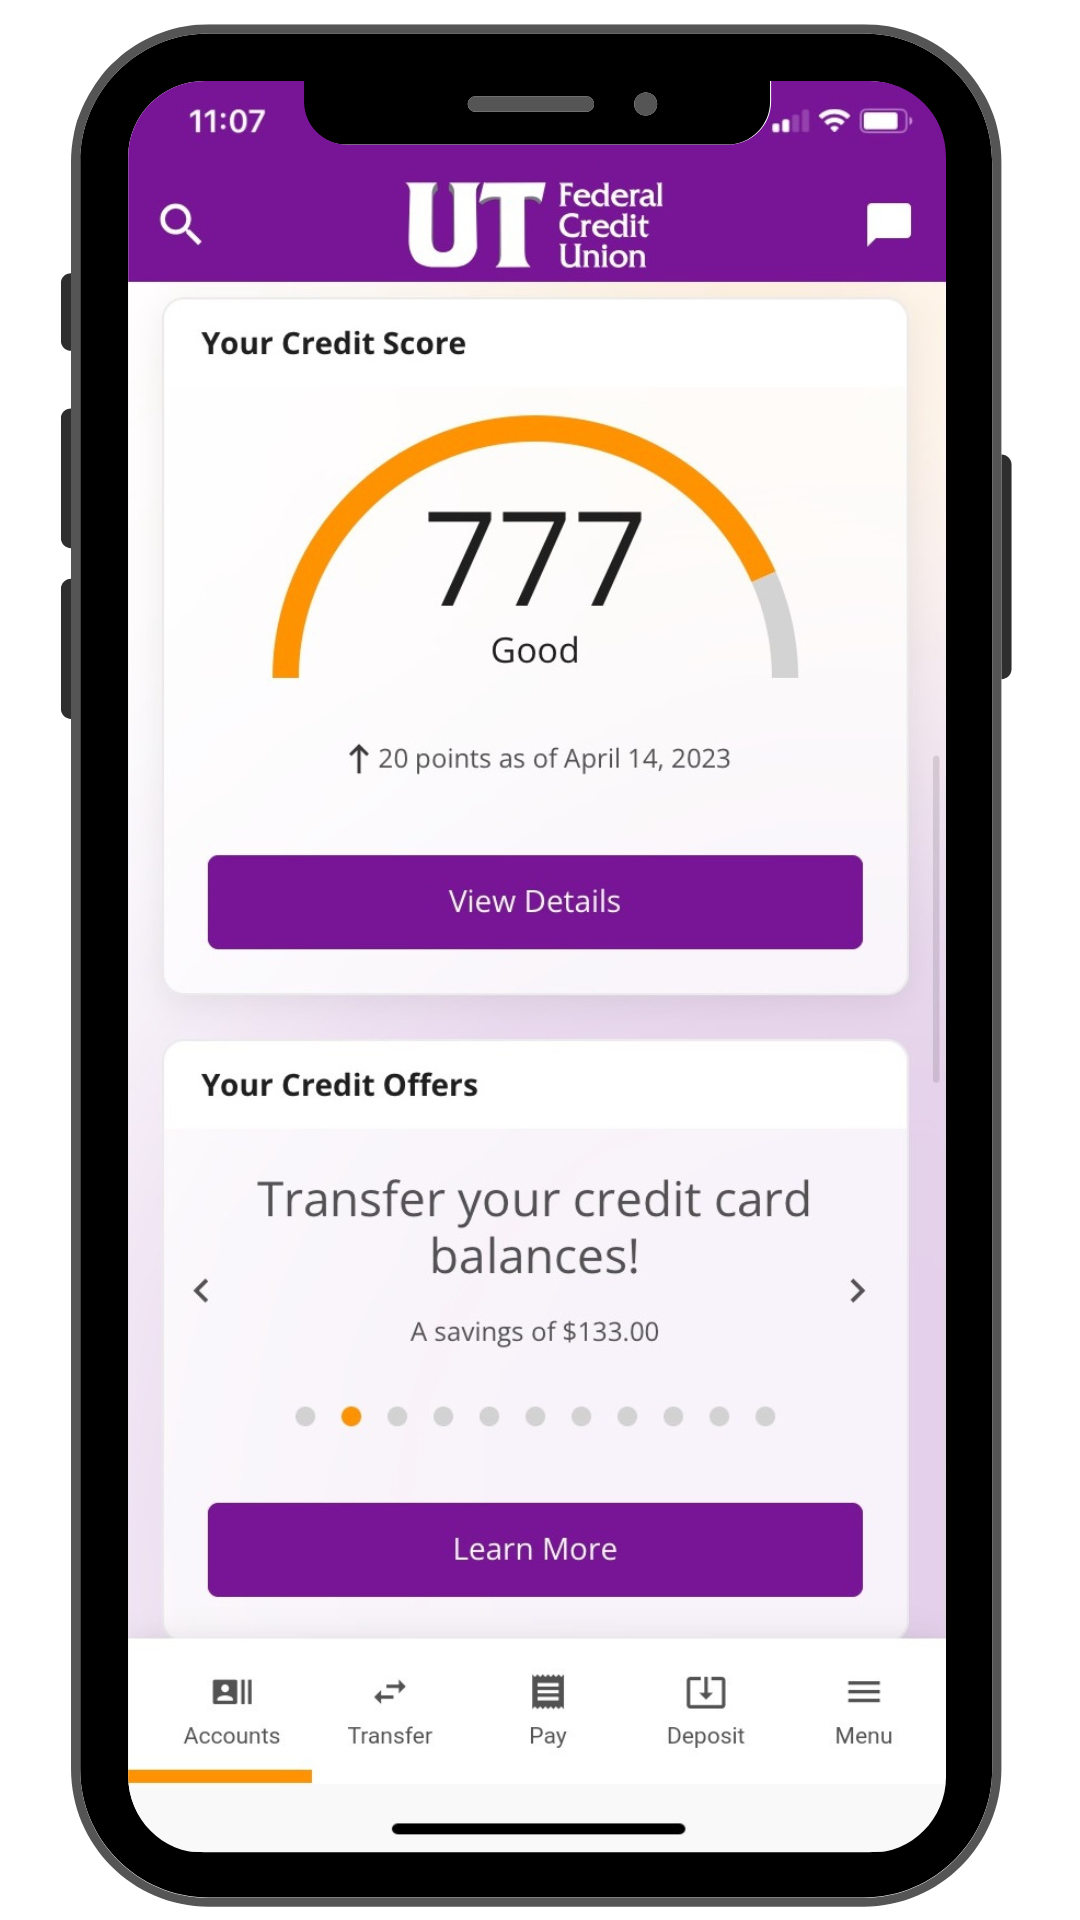 Sneak peek of credit score feature on the upgraded mobile app.